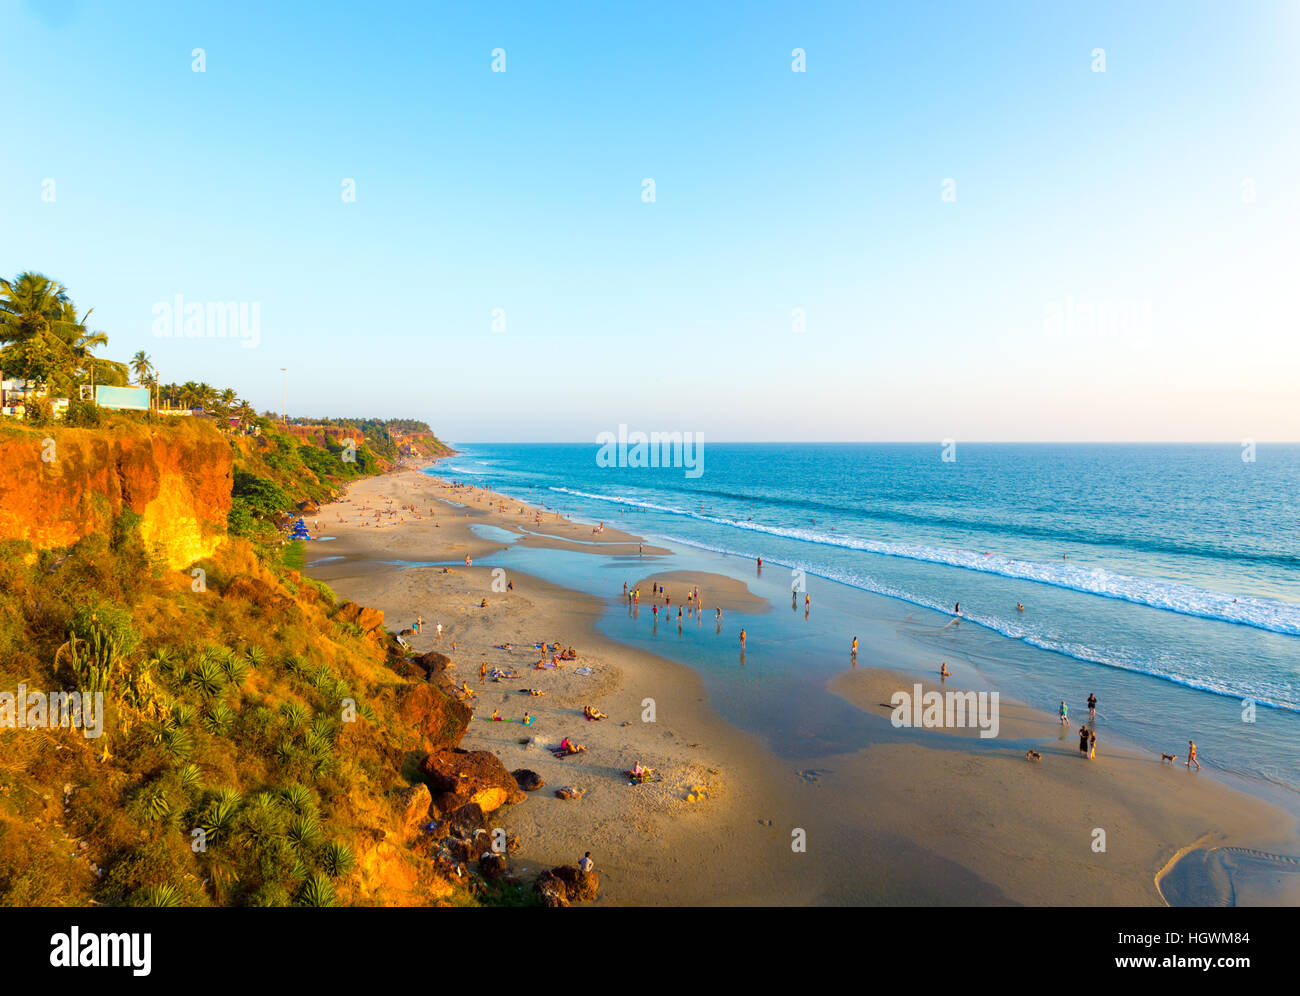 High angle view of sandy beach at low tide and ocean from cliffs on a clear, blue sky day in Varkala, Kerala, India. Horizontal Stock Photo